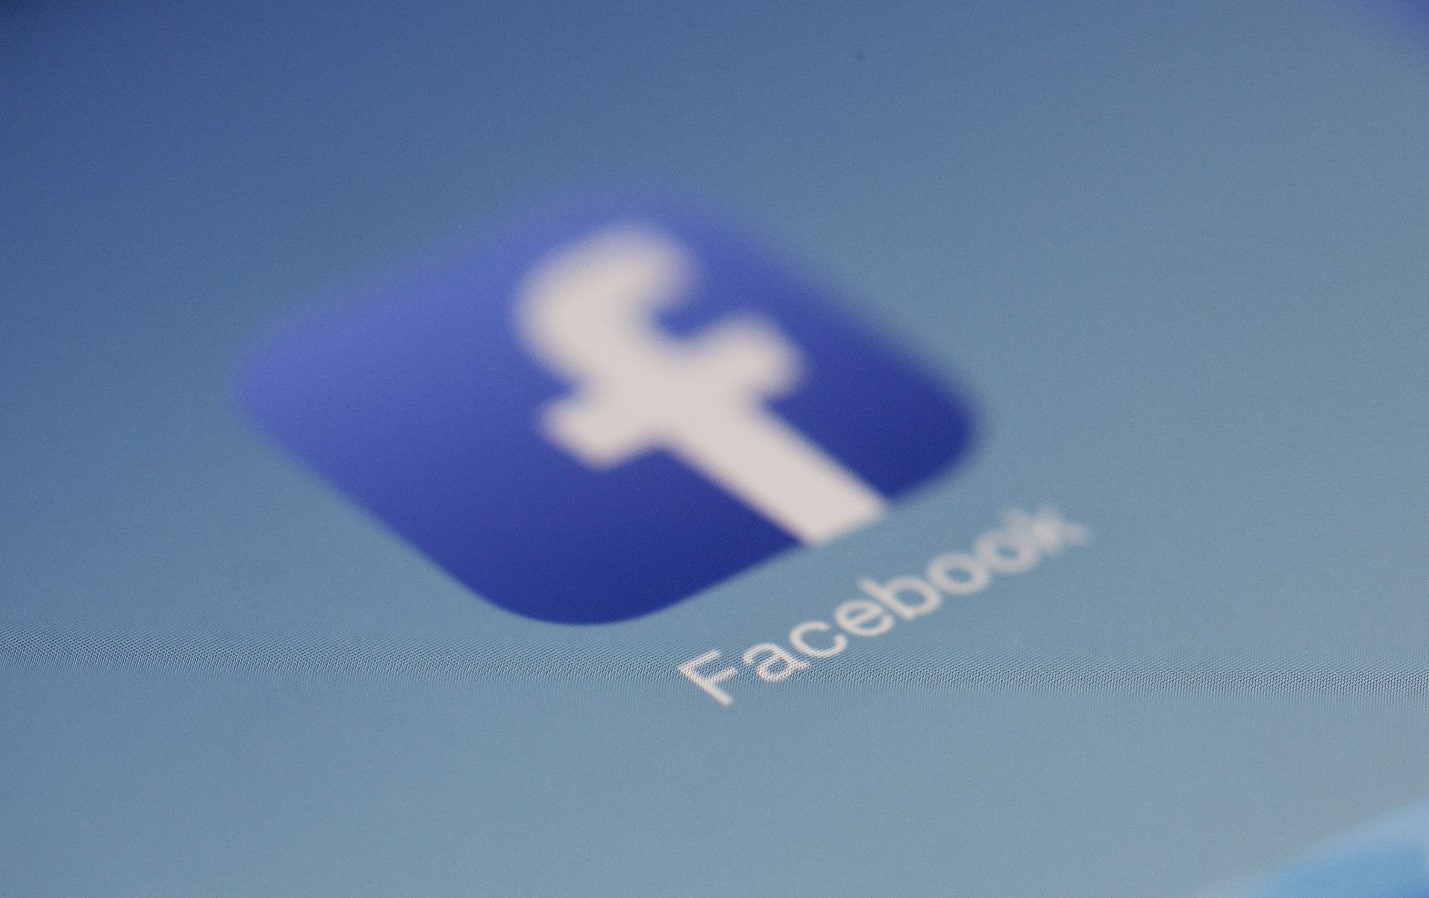 Leaving Facebook could make you happier, study suggests